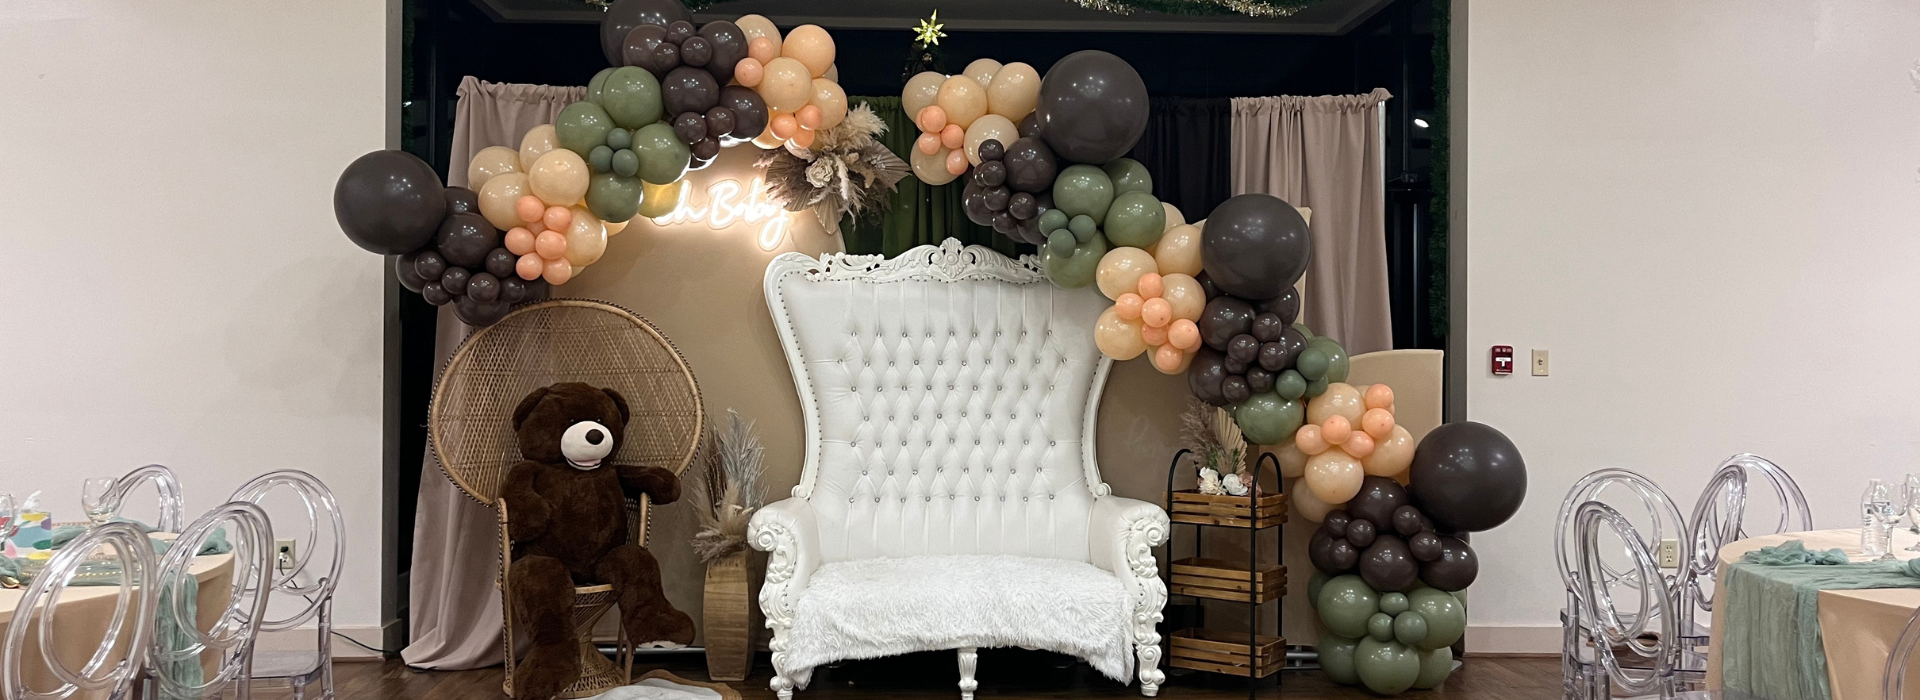 baby shower decor with a balloon arch and white chair